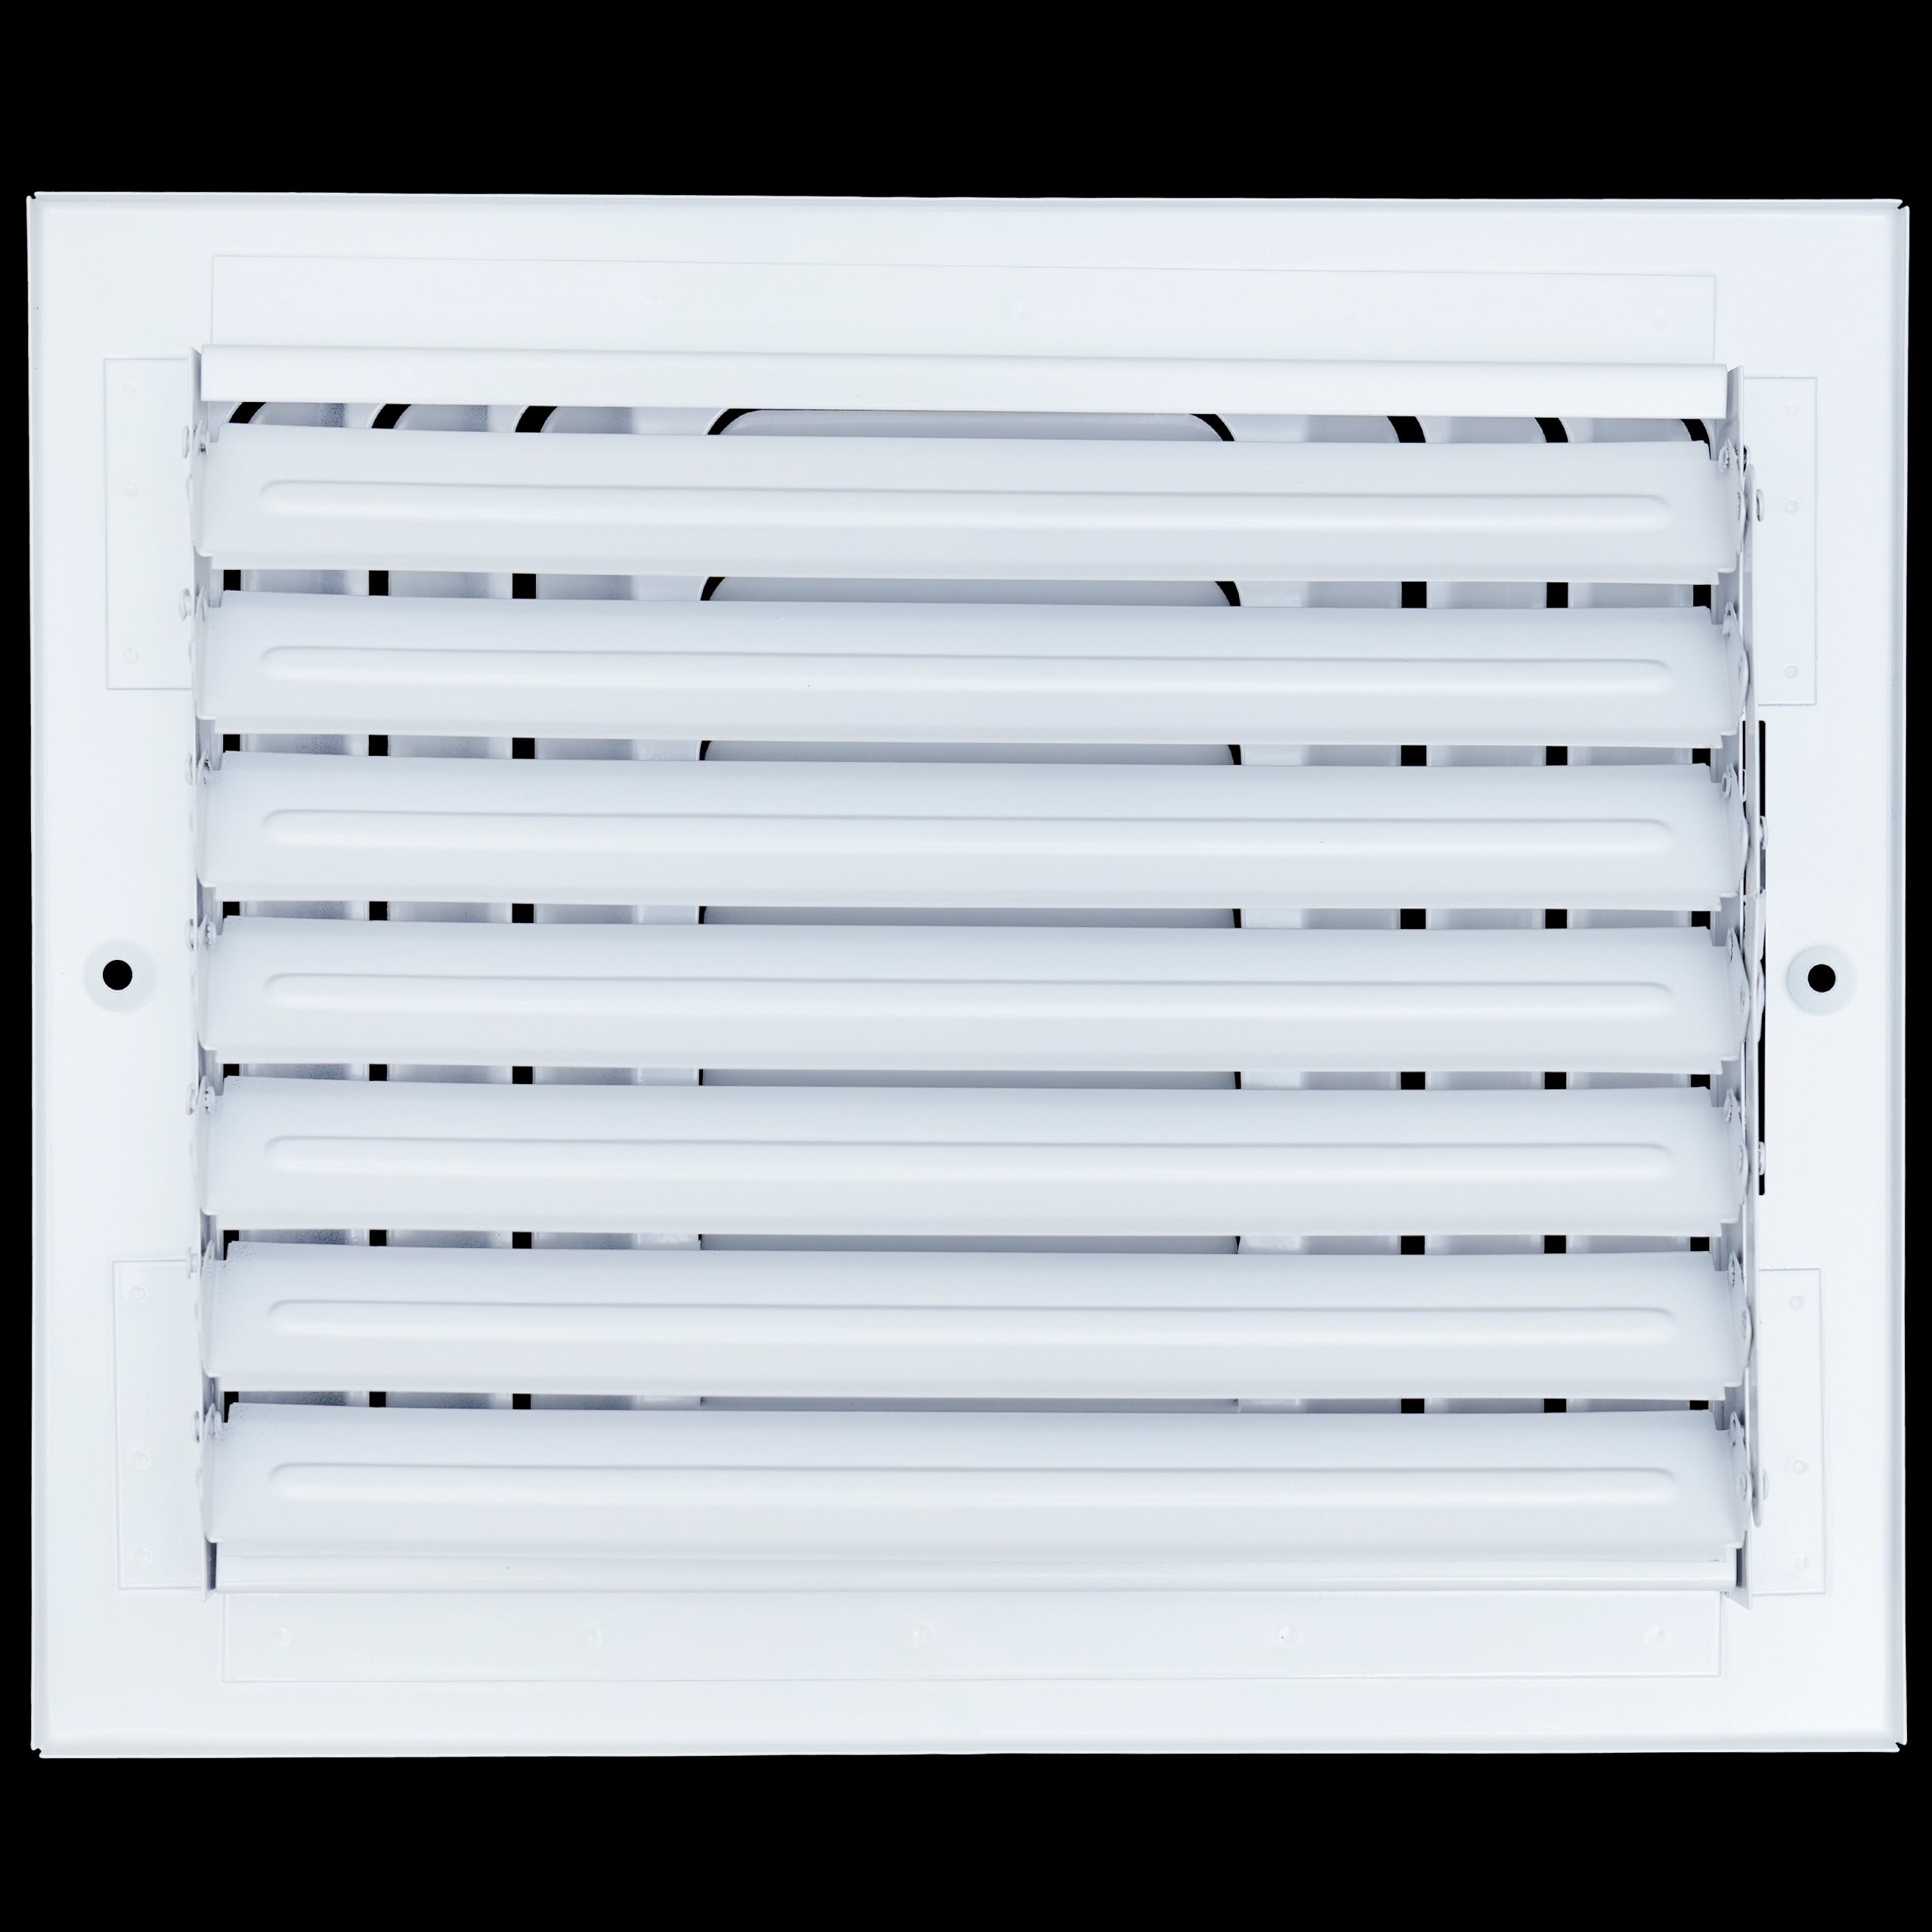 10"W x 8"H 3 WAY Fixed Curved Blade Air Supply Diffuser | Register Vent Cover Grill for Sidewall and Ceiling | White | Outer Dimensions: 11.75"W X 9.75"H